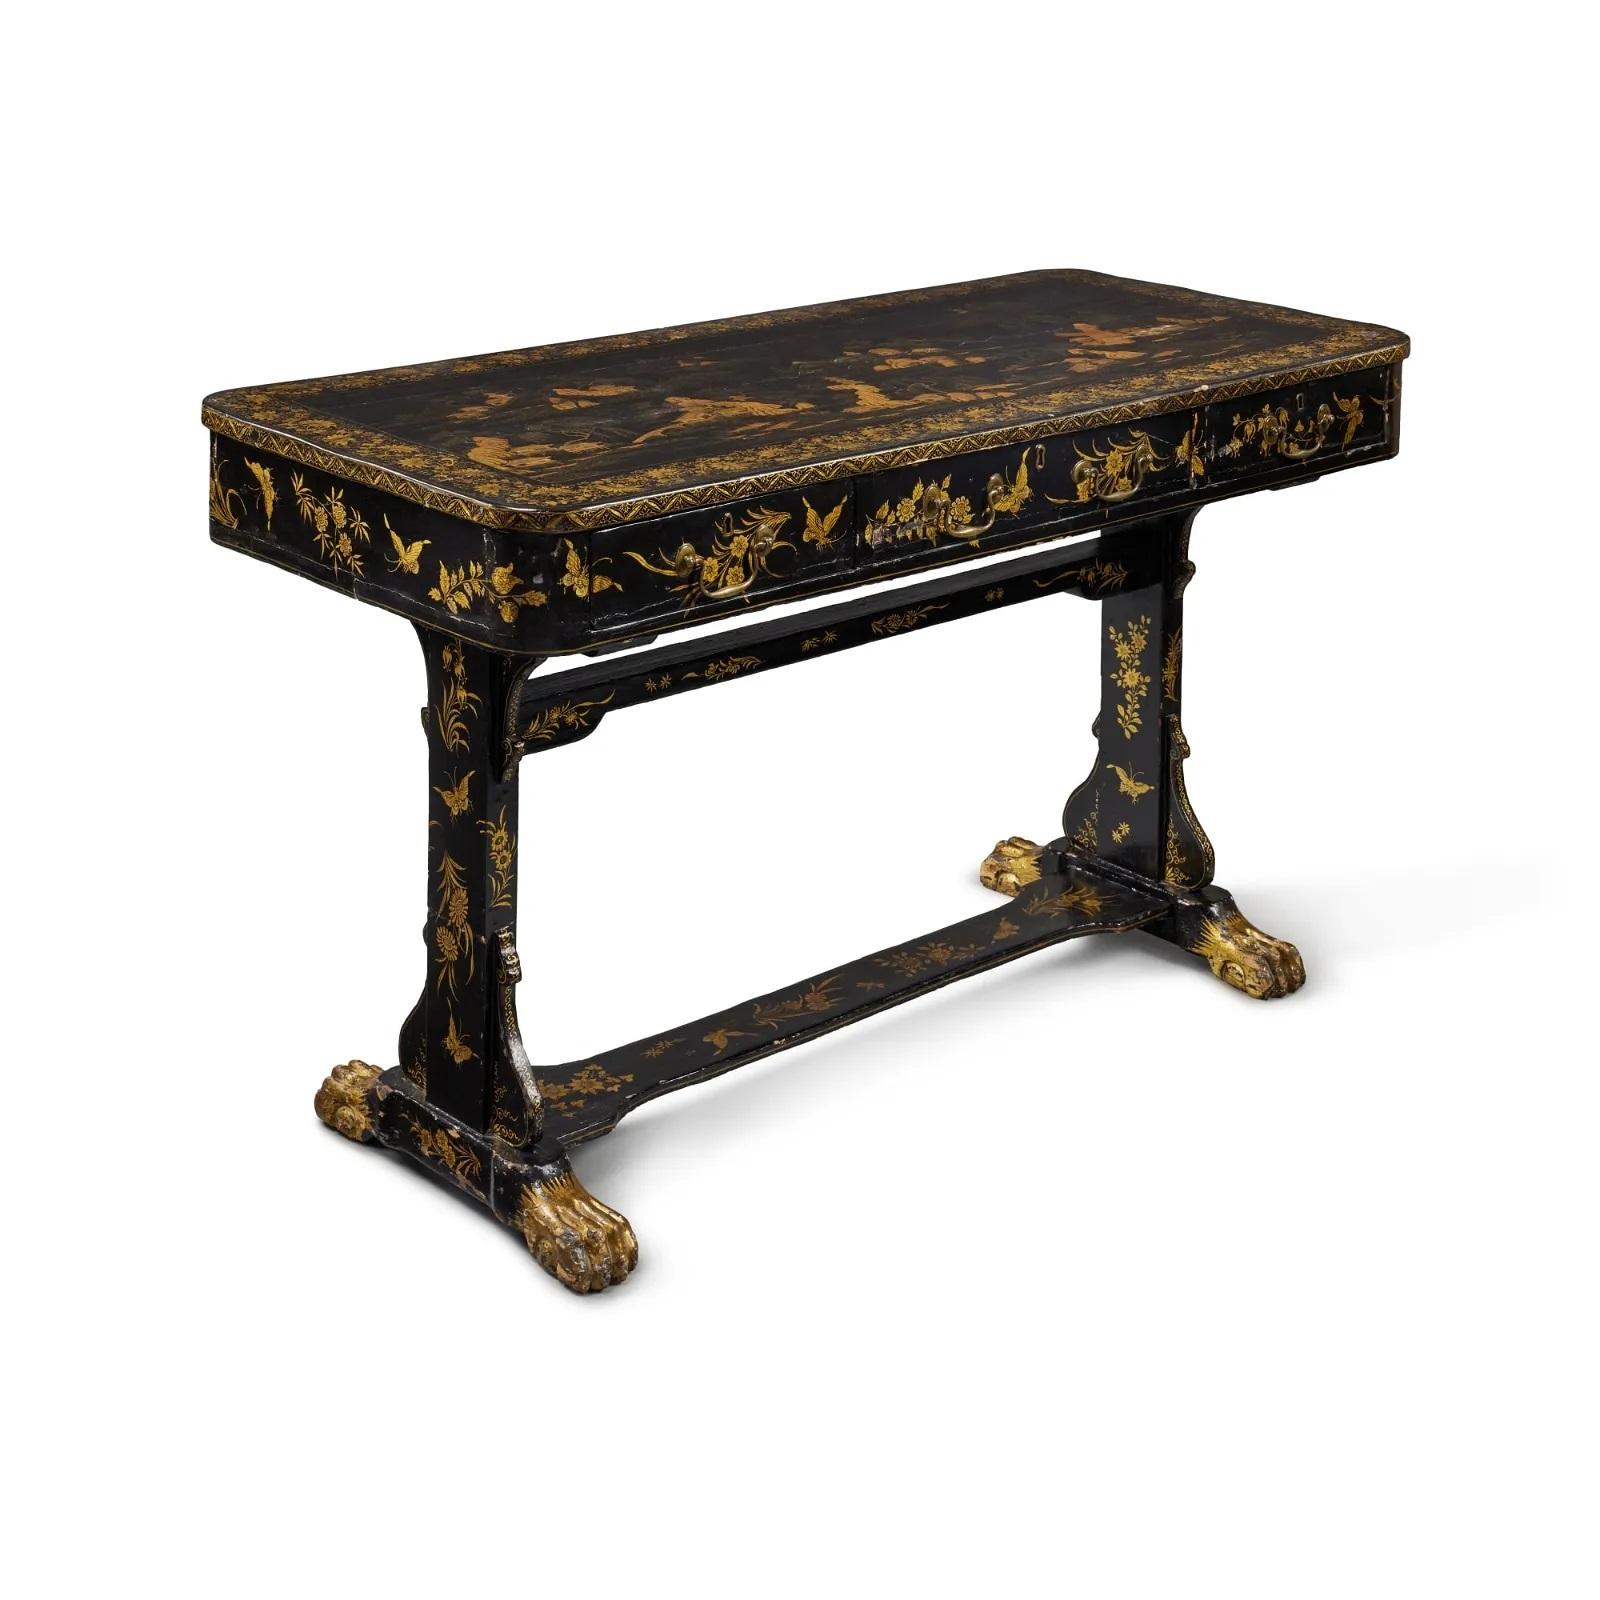 A beautiful Chinese Export black and gold lacquer desk, elaboratly decorated with detailed Chinoiserie scenes, three drawers and beautiful base with stylized paw feet, custom fitted glass top / work surface, China, 19th century

MEASUREMENTS:

31.5